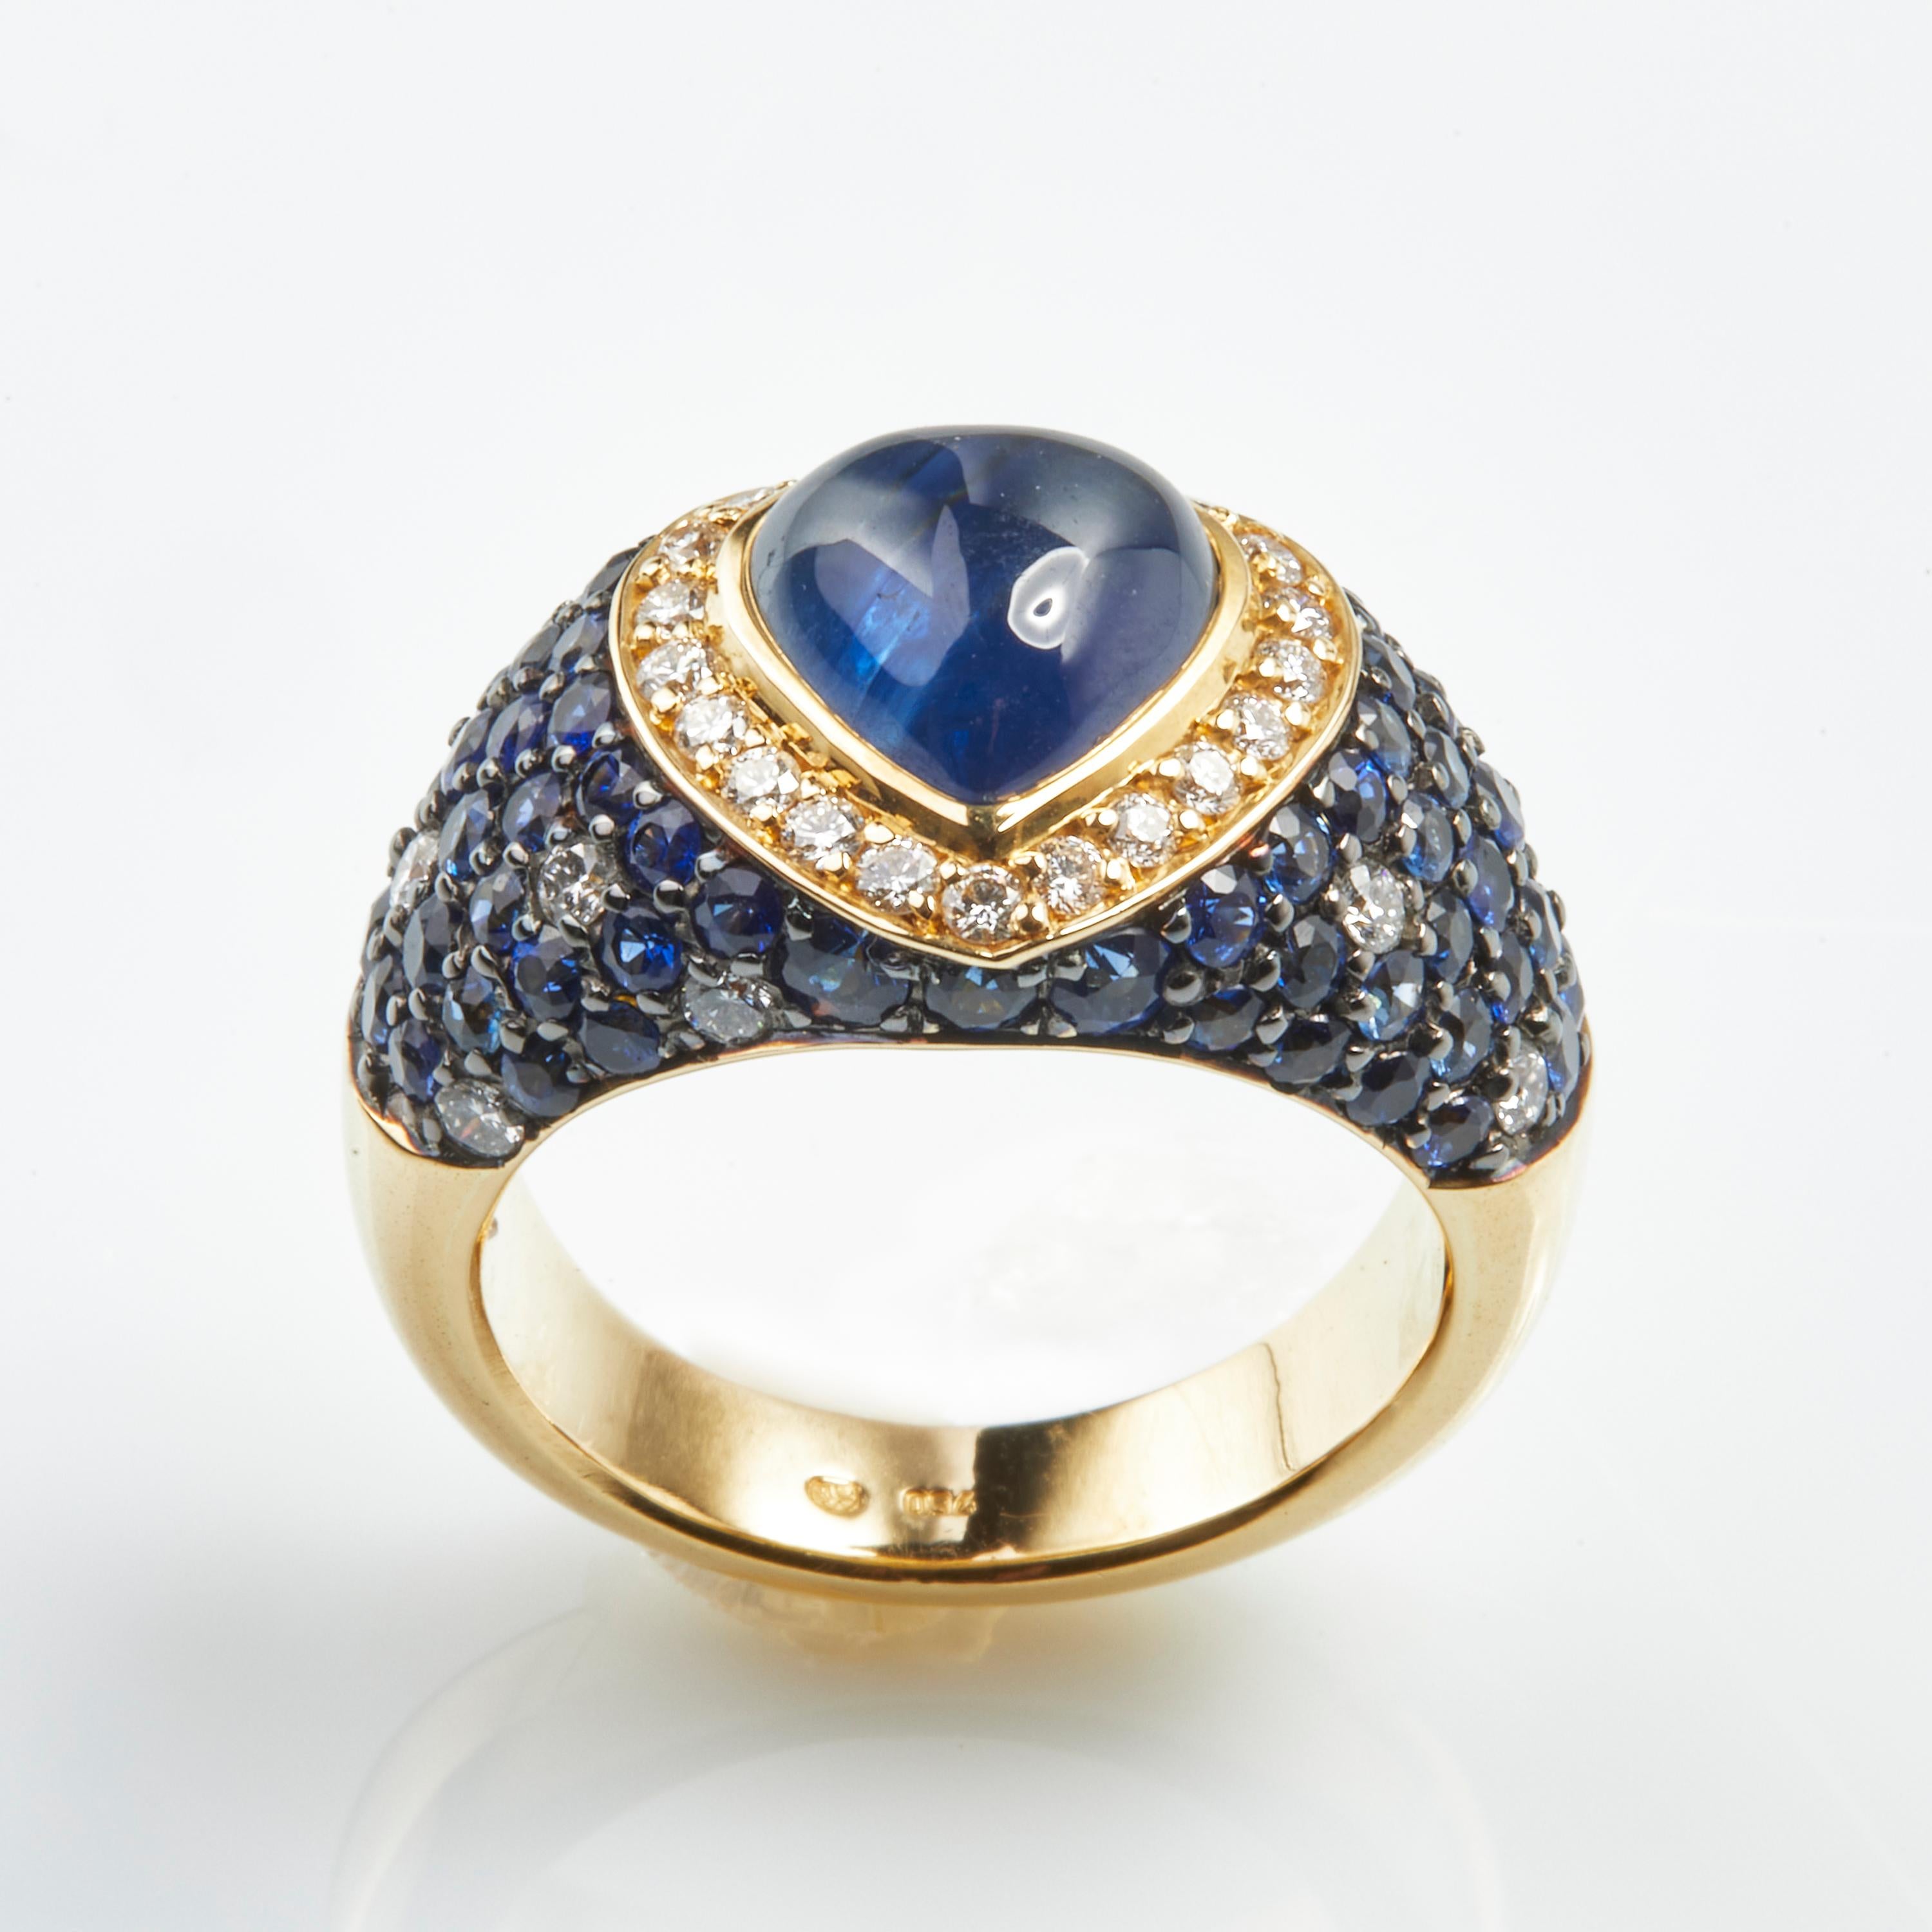 18 Karat Yellow Gold Diamond and Sapphire Coktail Ring
30 Diamonds 0.69 Carat
27 sappire  2.94 Carat
1 sapphire  cab. 3.46 ct.
Size 56 US 7.6

Founded in 1974, Gianni Lazzaro is a family-owned jewelery company based out of Düsseldorf,